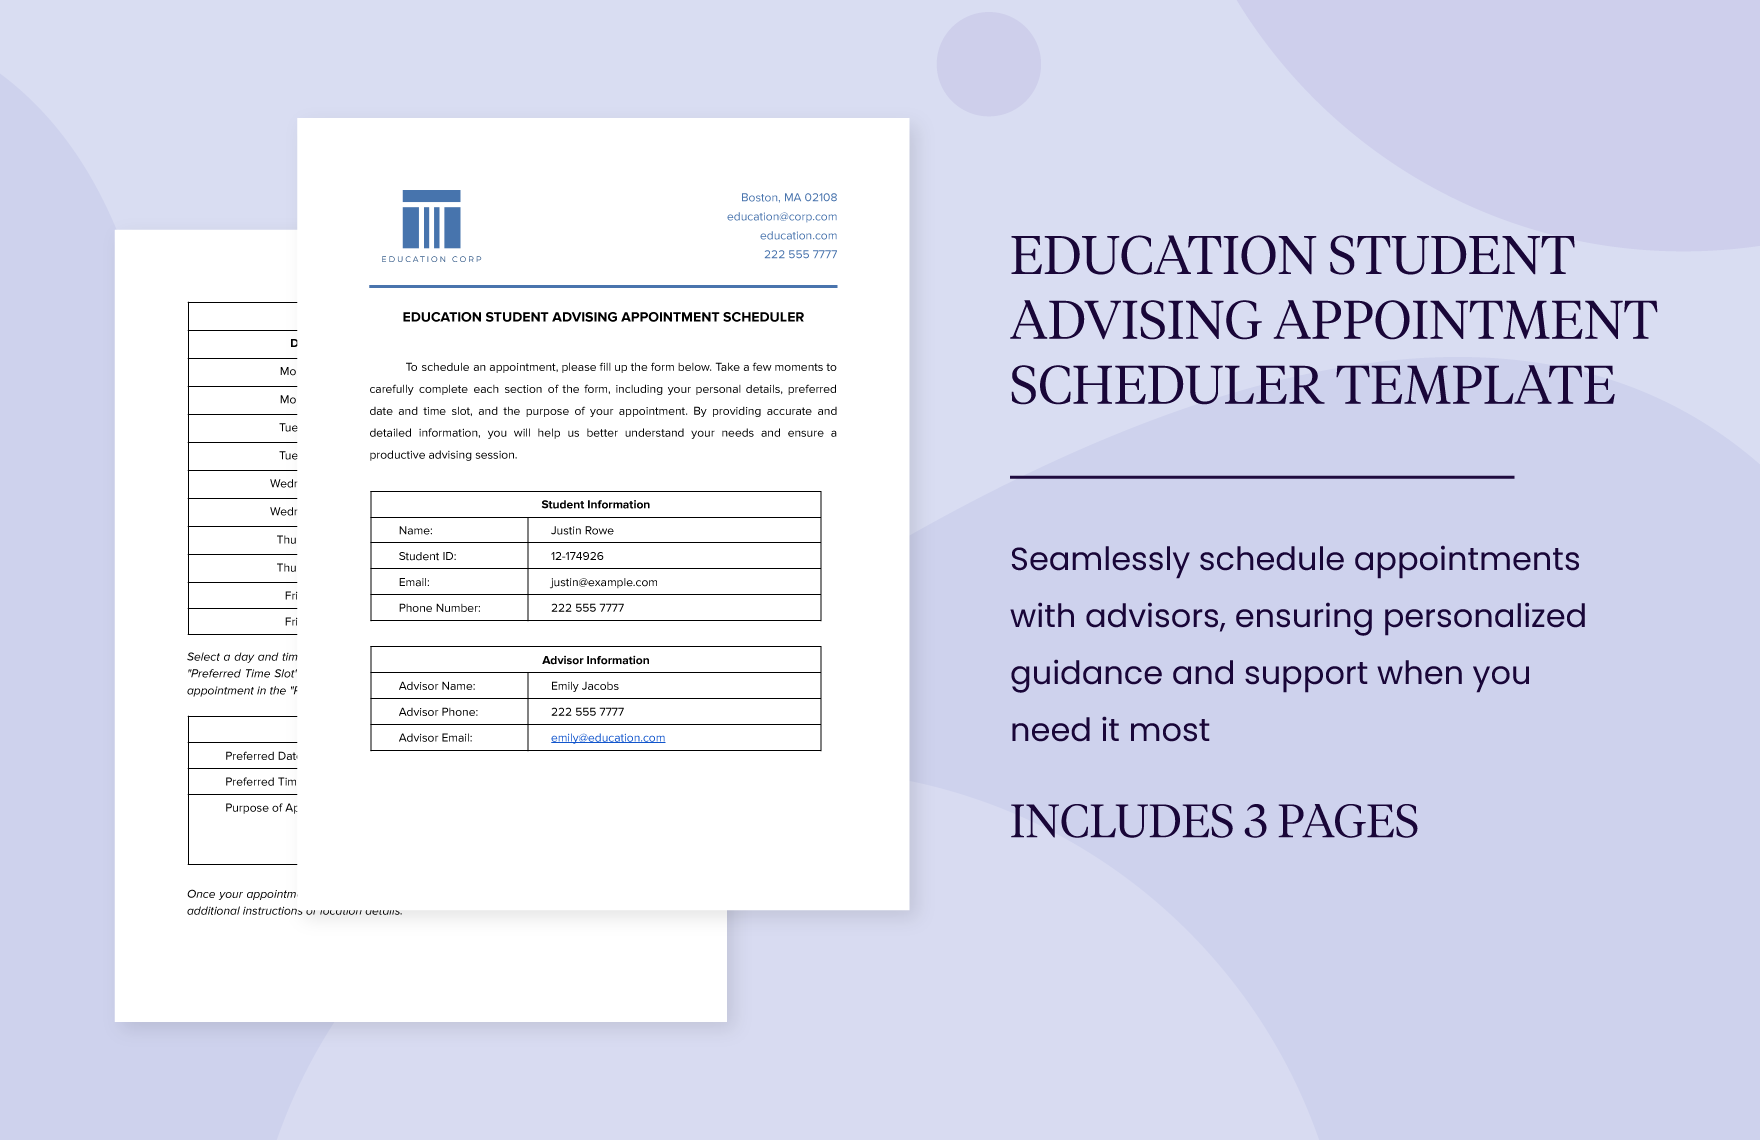 Education Student Advising Appointment Scheduler Template